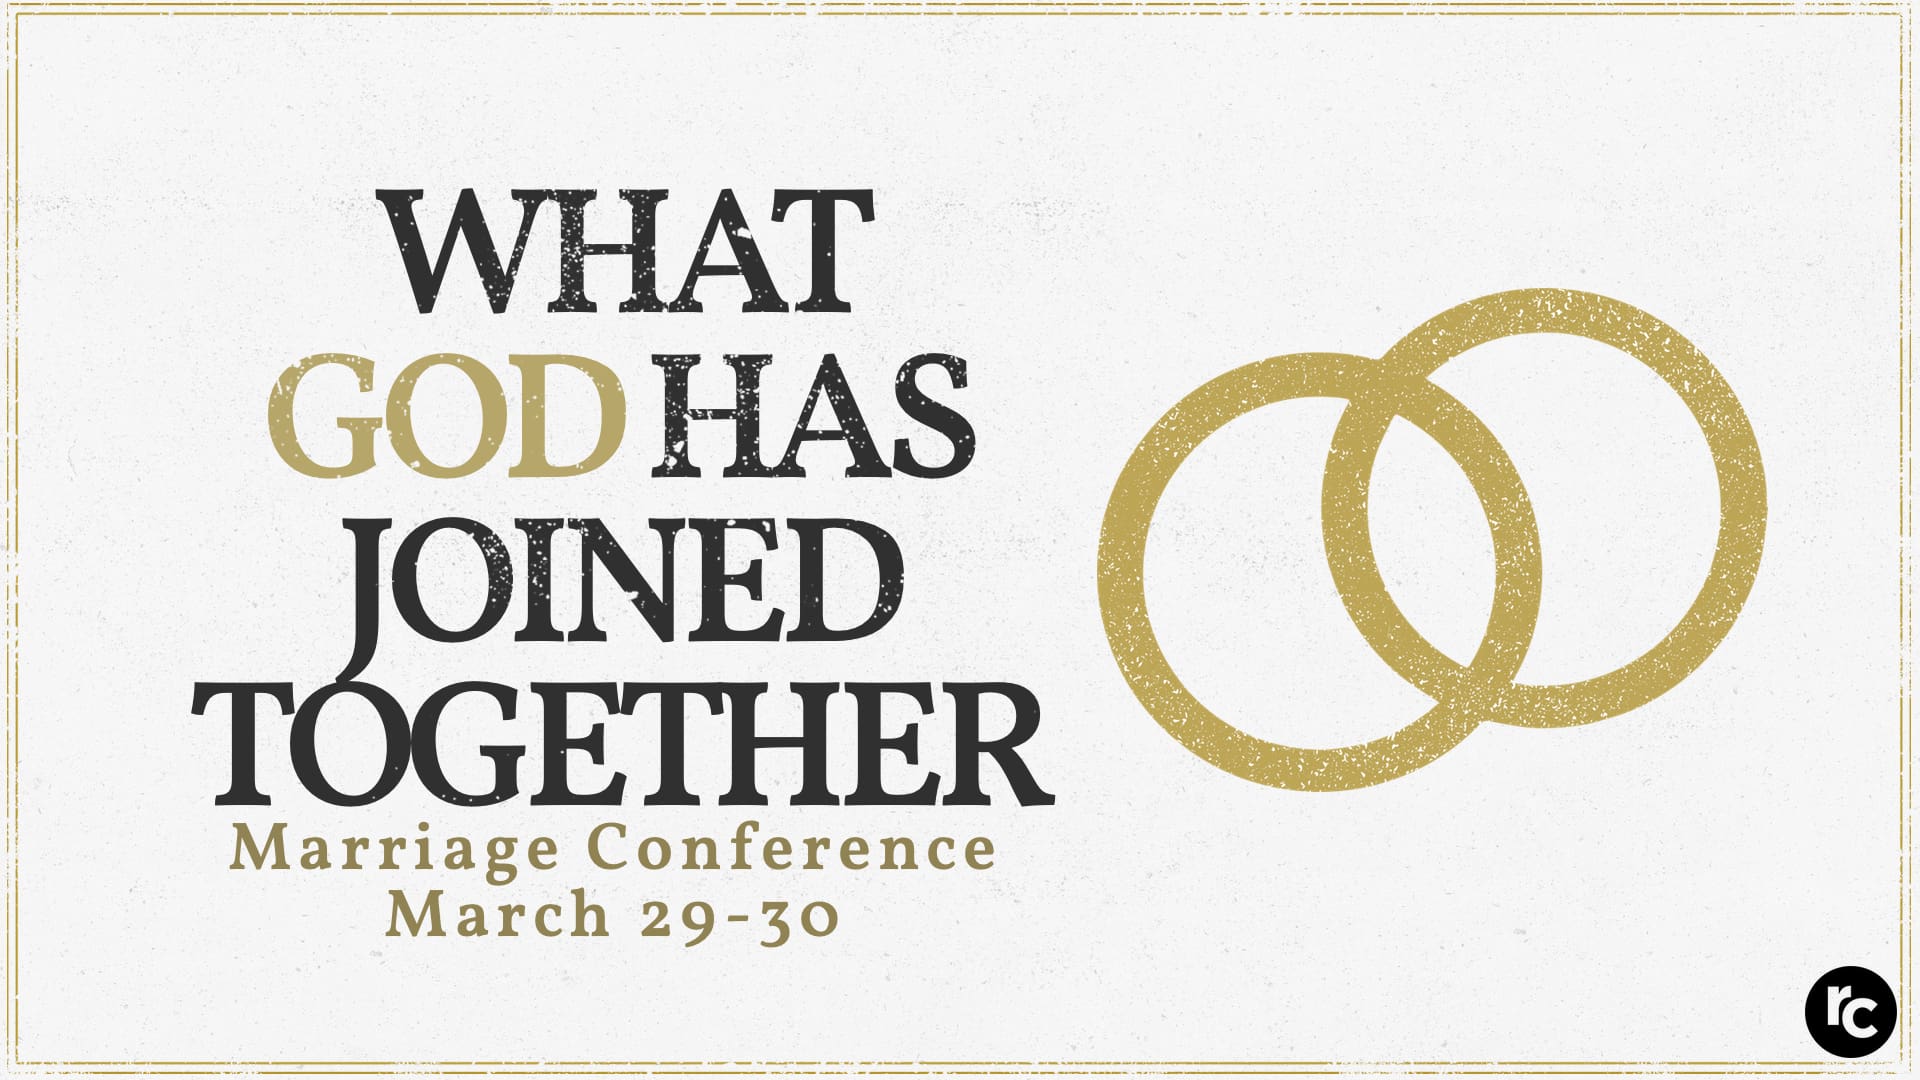 Reminders for the Marriage Conference